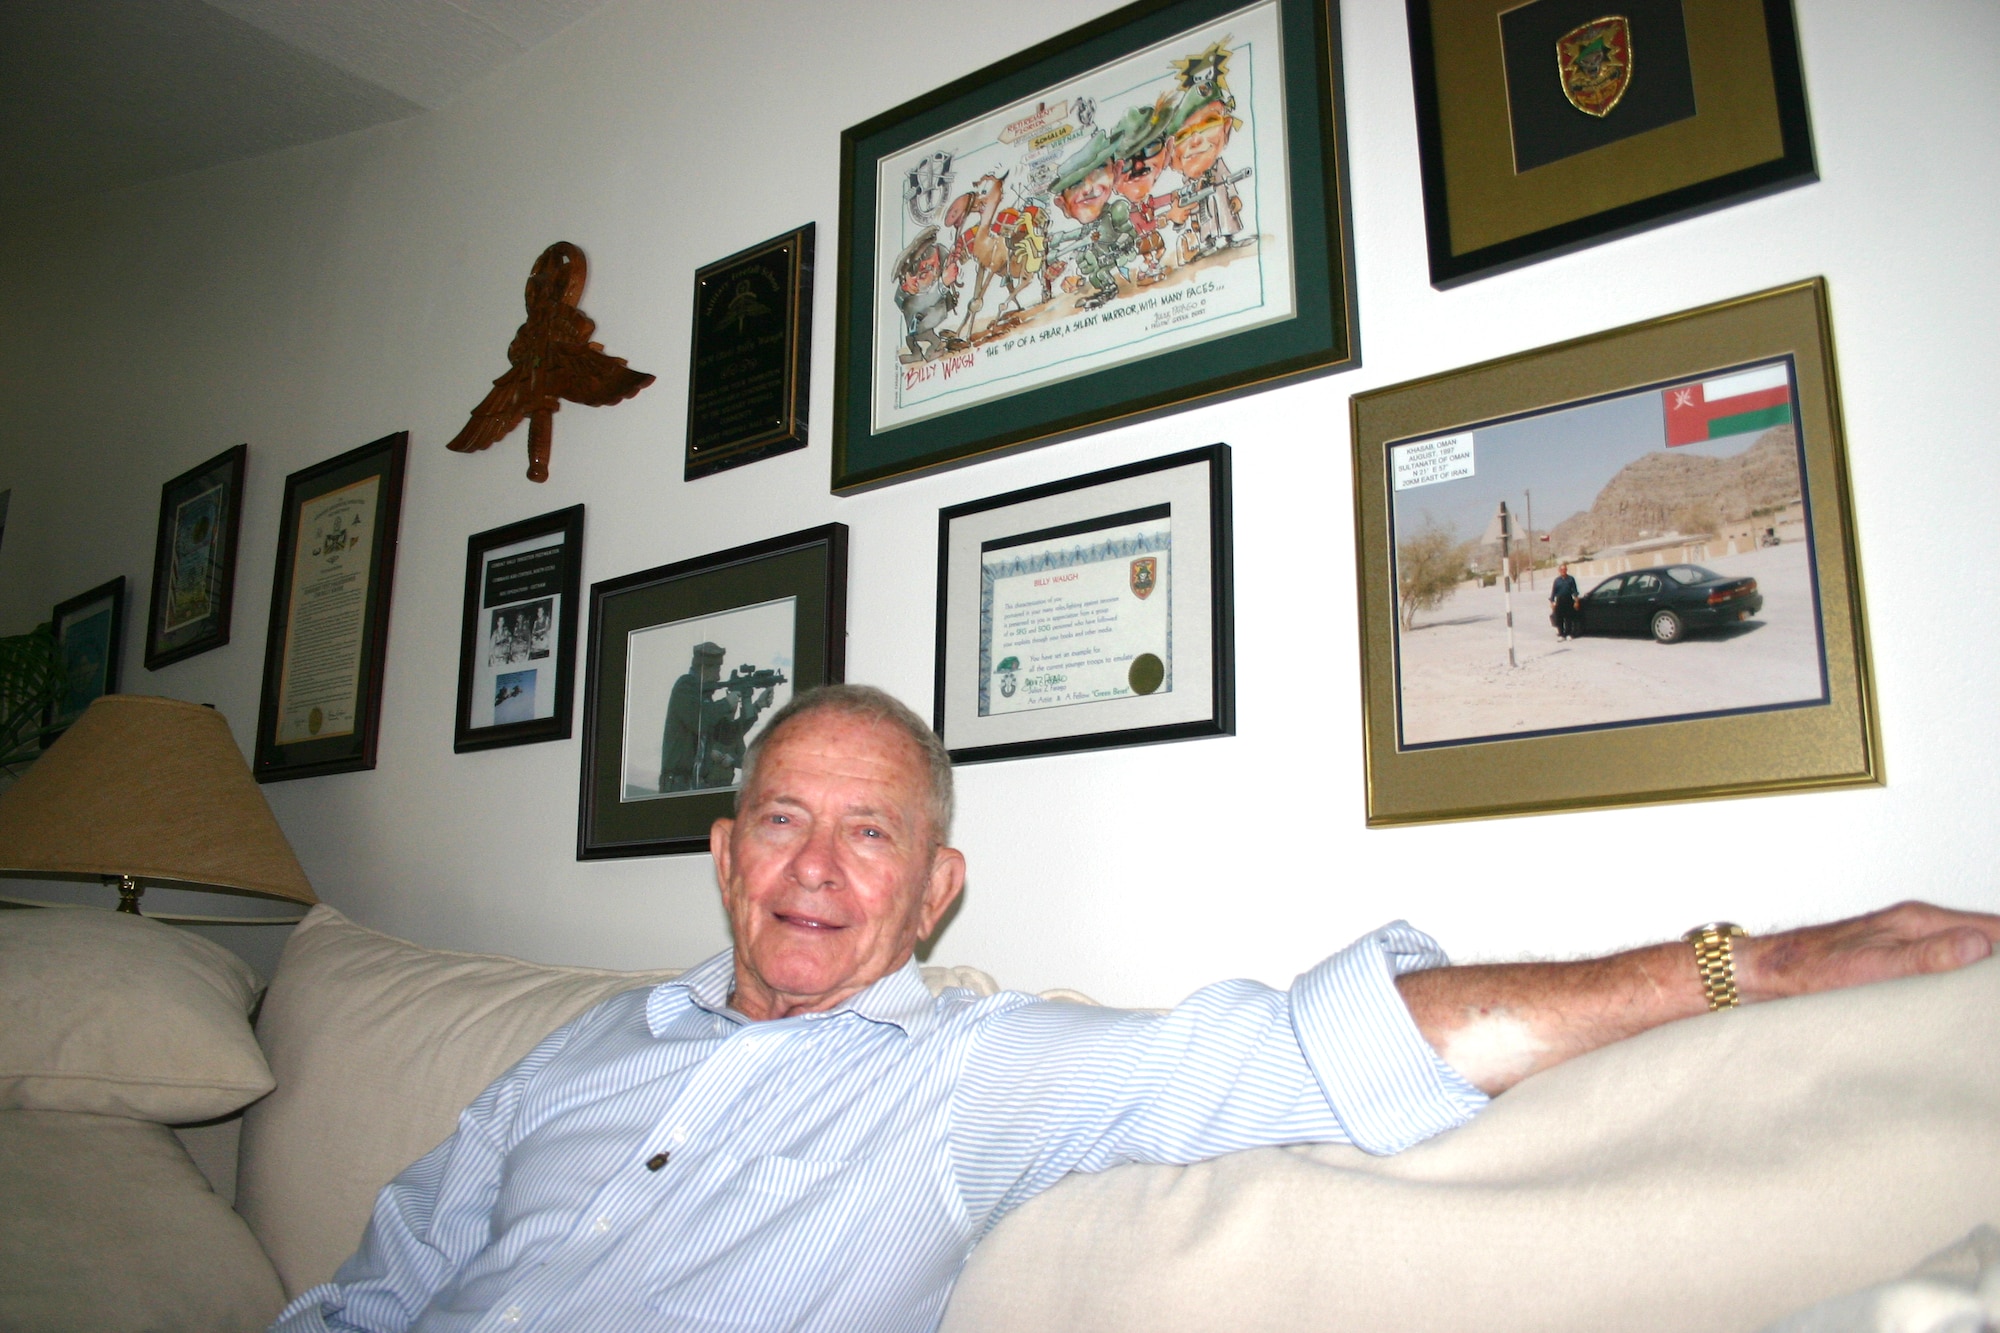 Billy Waugh relaxing at home. Behind him are photos and other memorabilla from his years of military and CIA service. (US Air Force photo by Nick Stubbs)